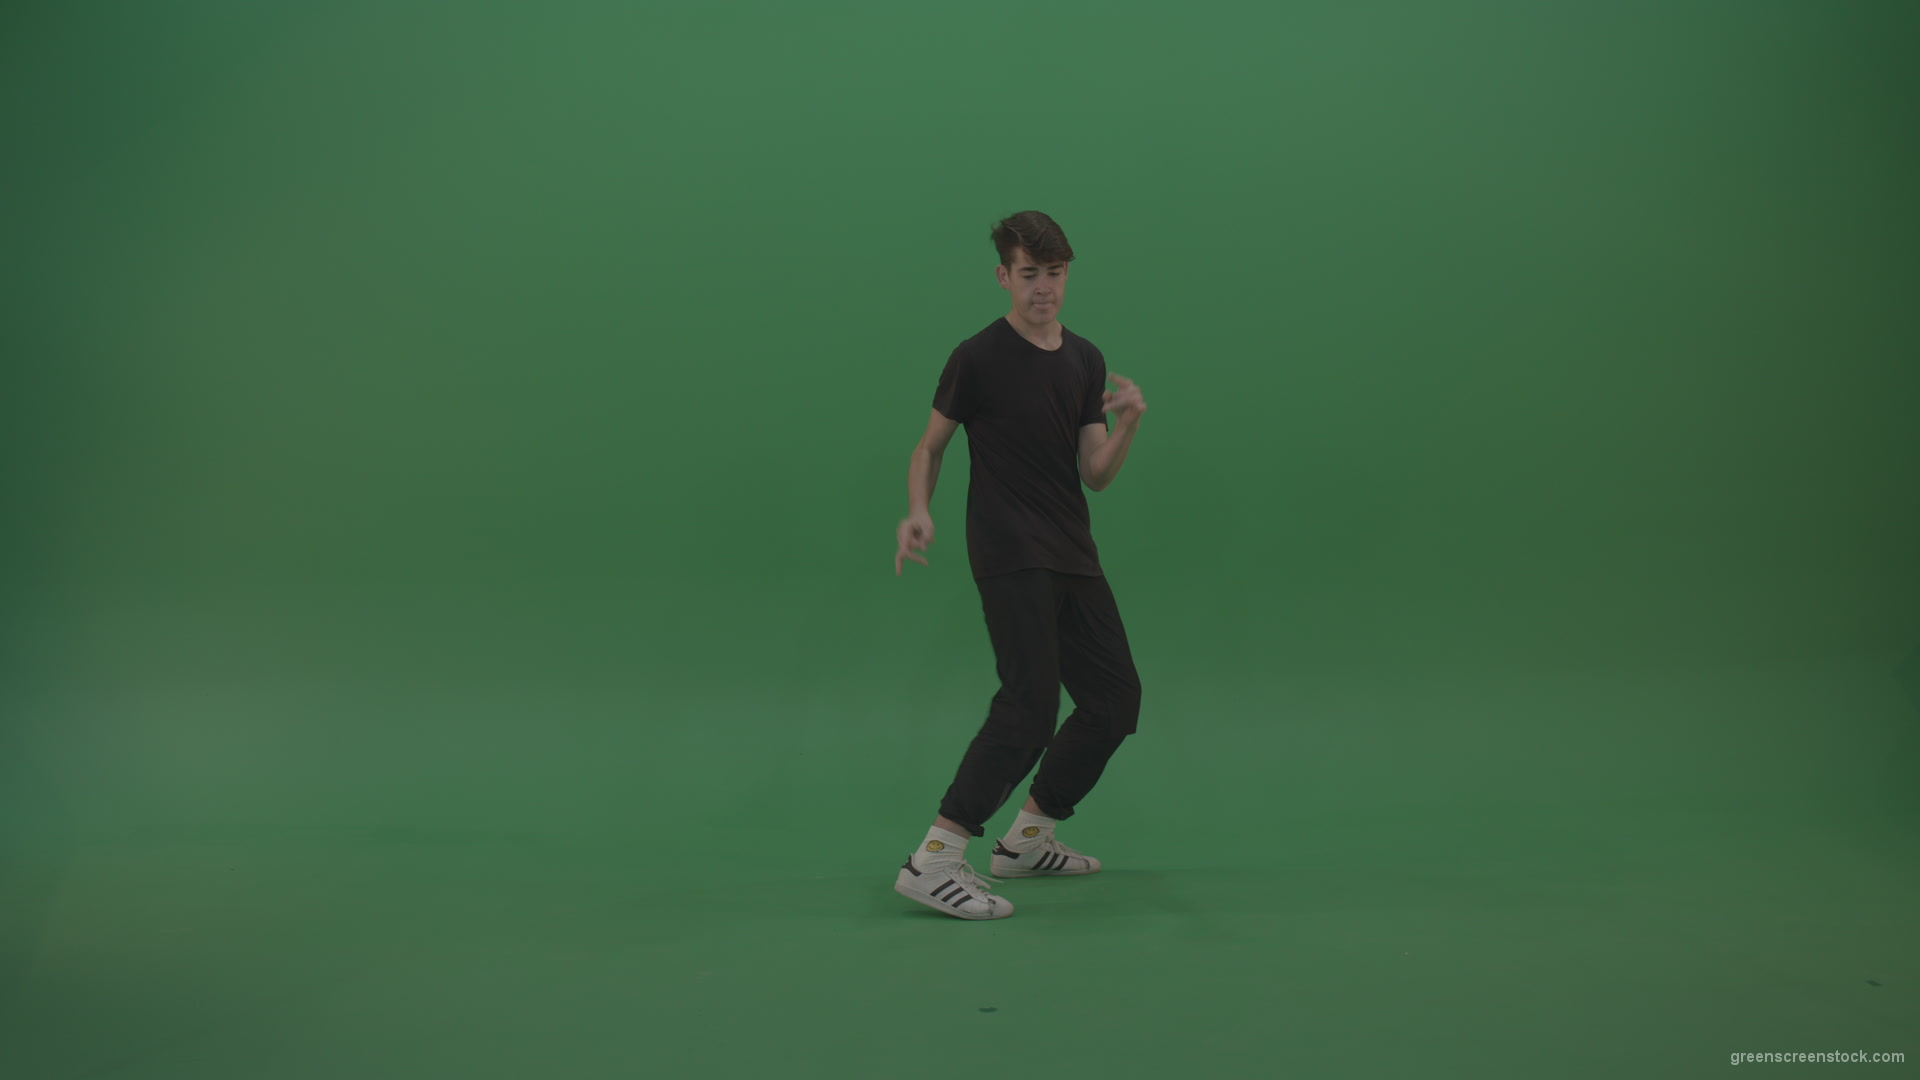 Young_Brunette_Boy_Showing_Awesome_Hip_Hop_Dance_Technical_Skills_With_Robot_Tought_Moves_On_Green_Screen_Chroma_Key_Background_008 Green Screen Stock